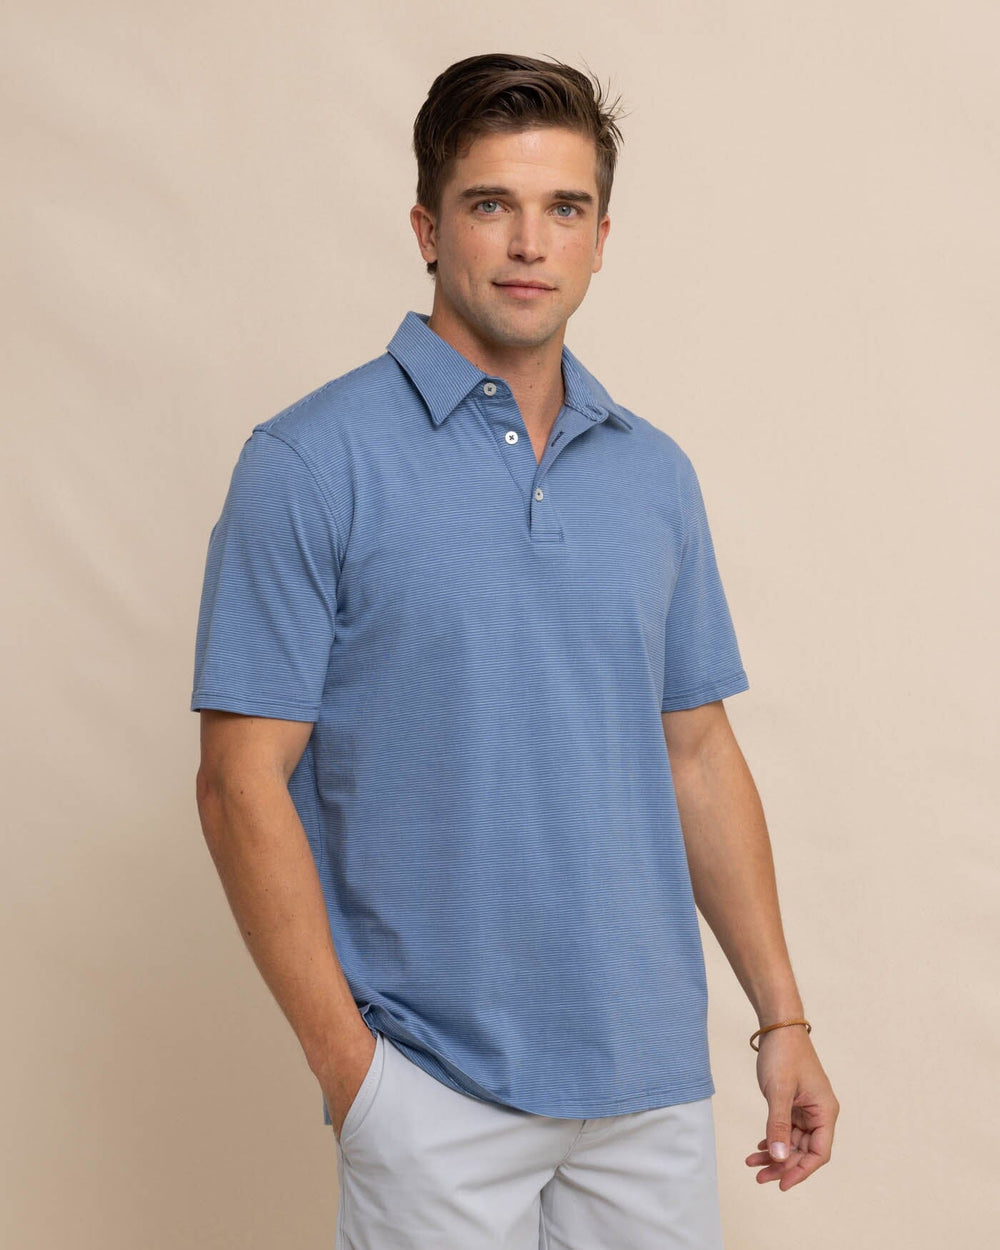 The front view of the Southern Tide The Seaport Davenport Stripe Polo by Southern Tide - Coronet Blue